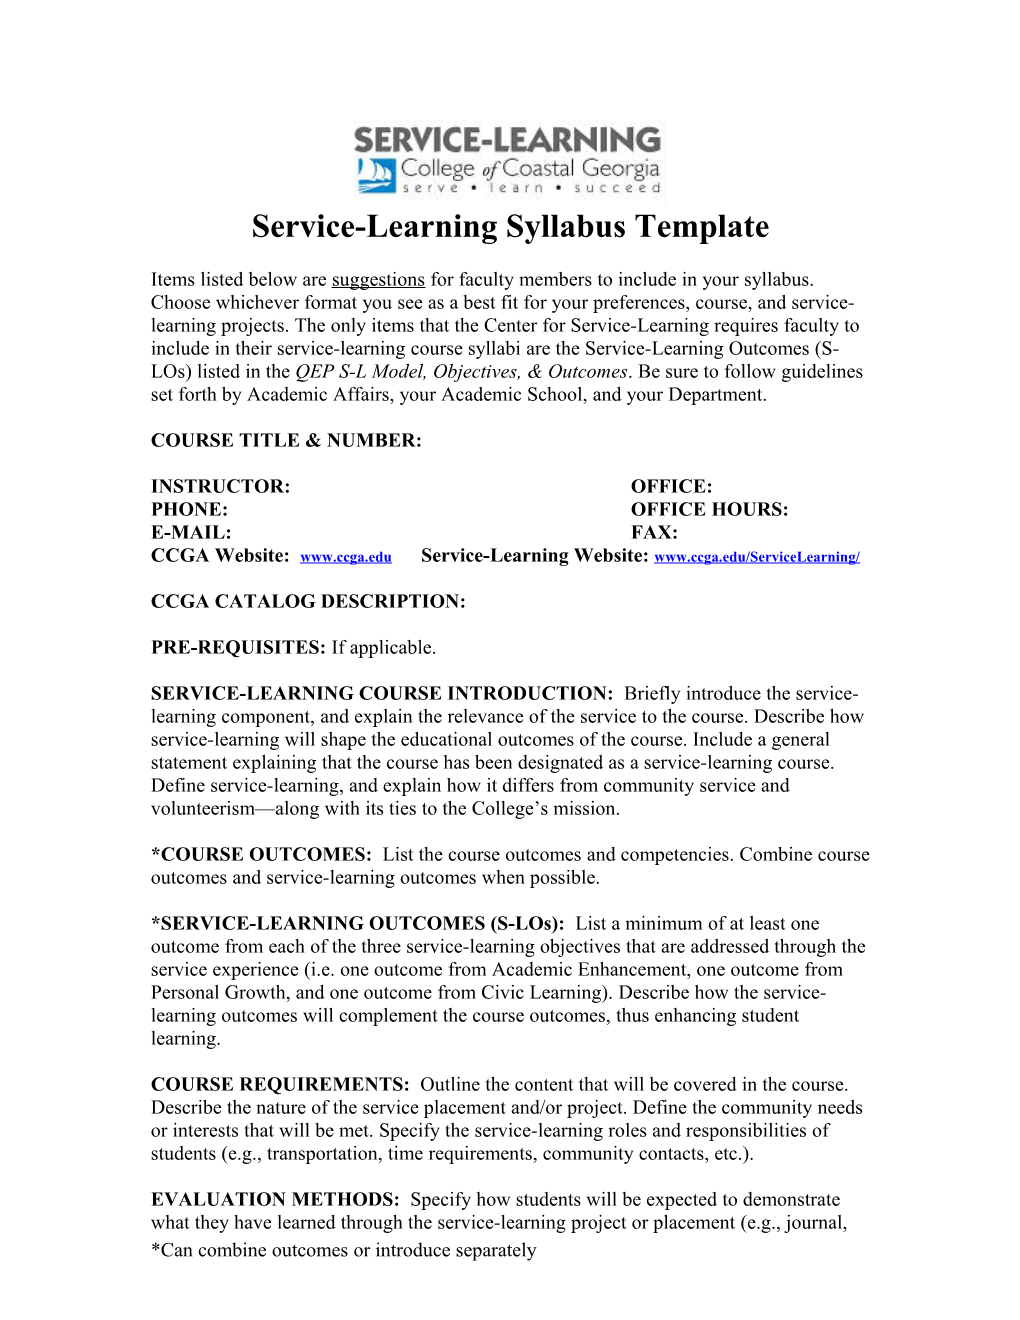 Service-Learning Syllabus Template